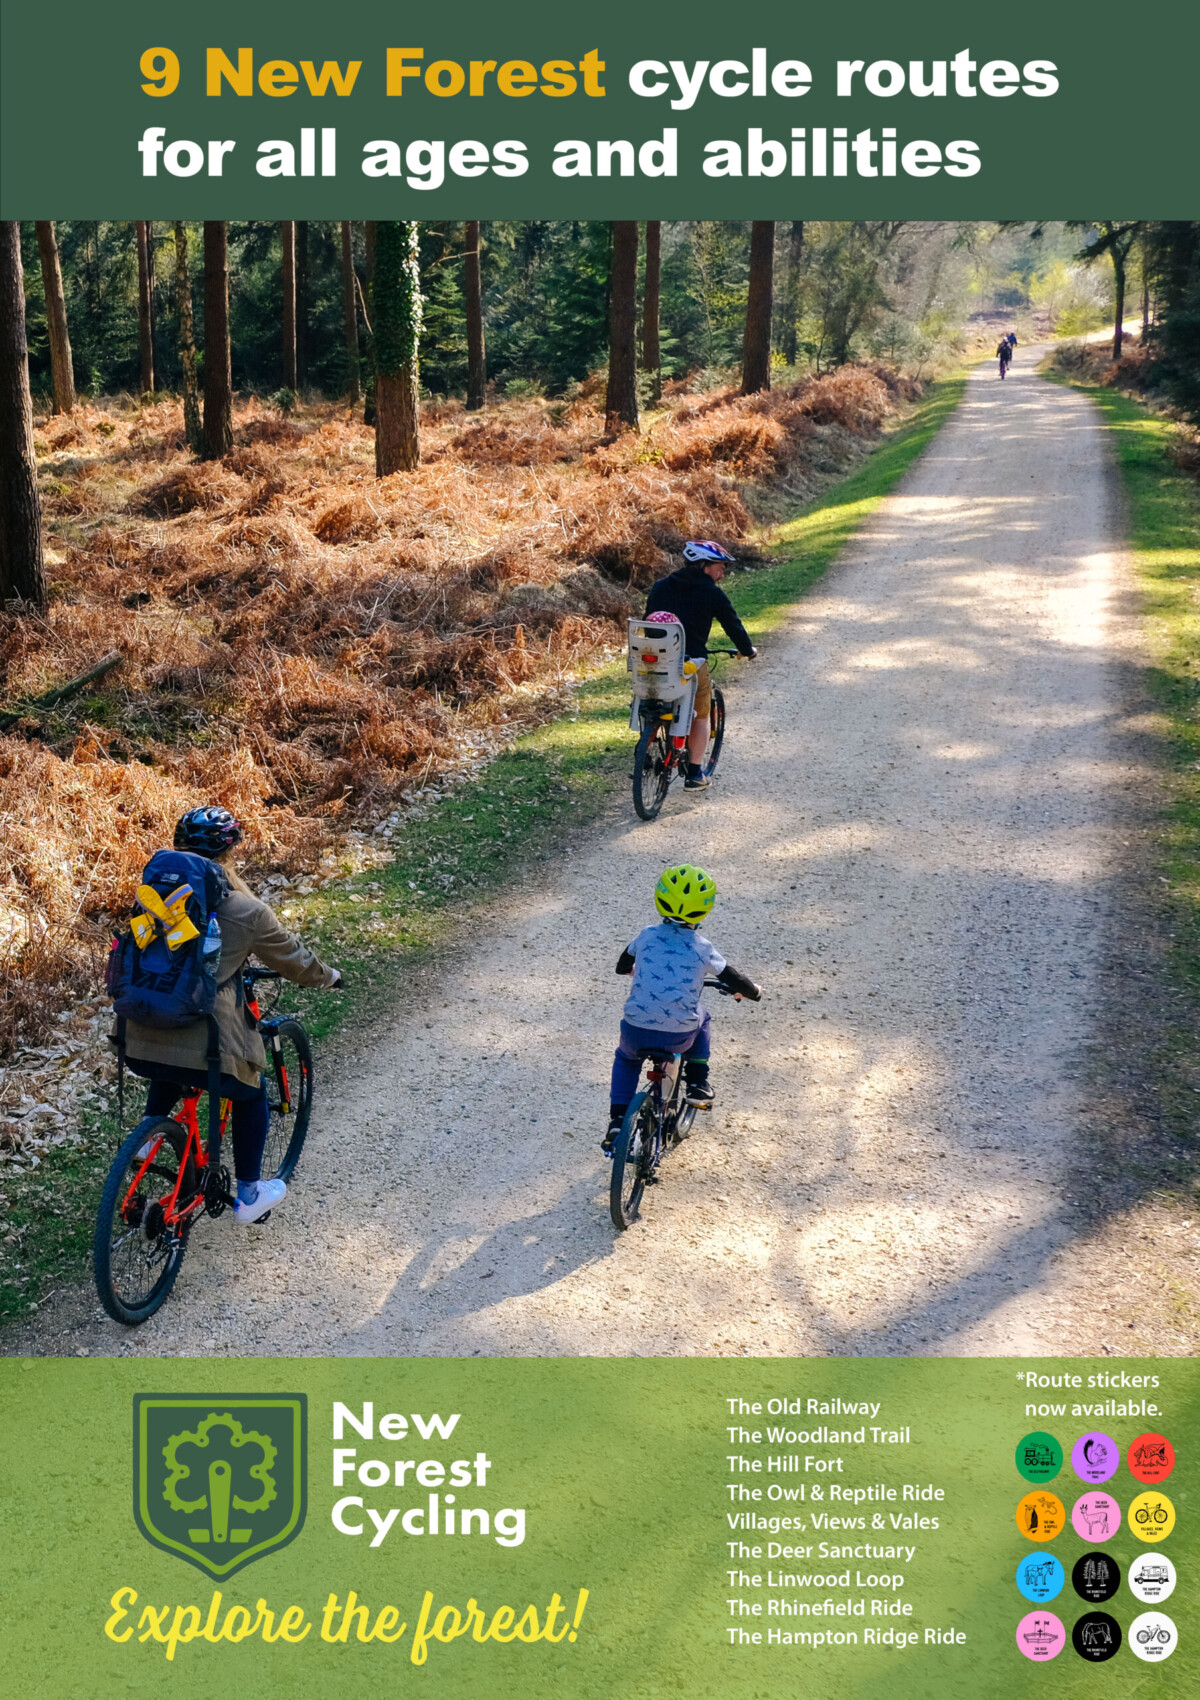 New Forest Cycle Routes